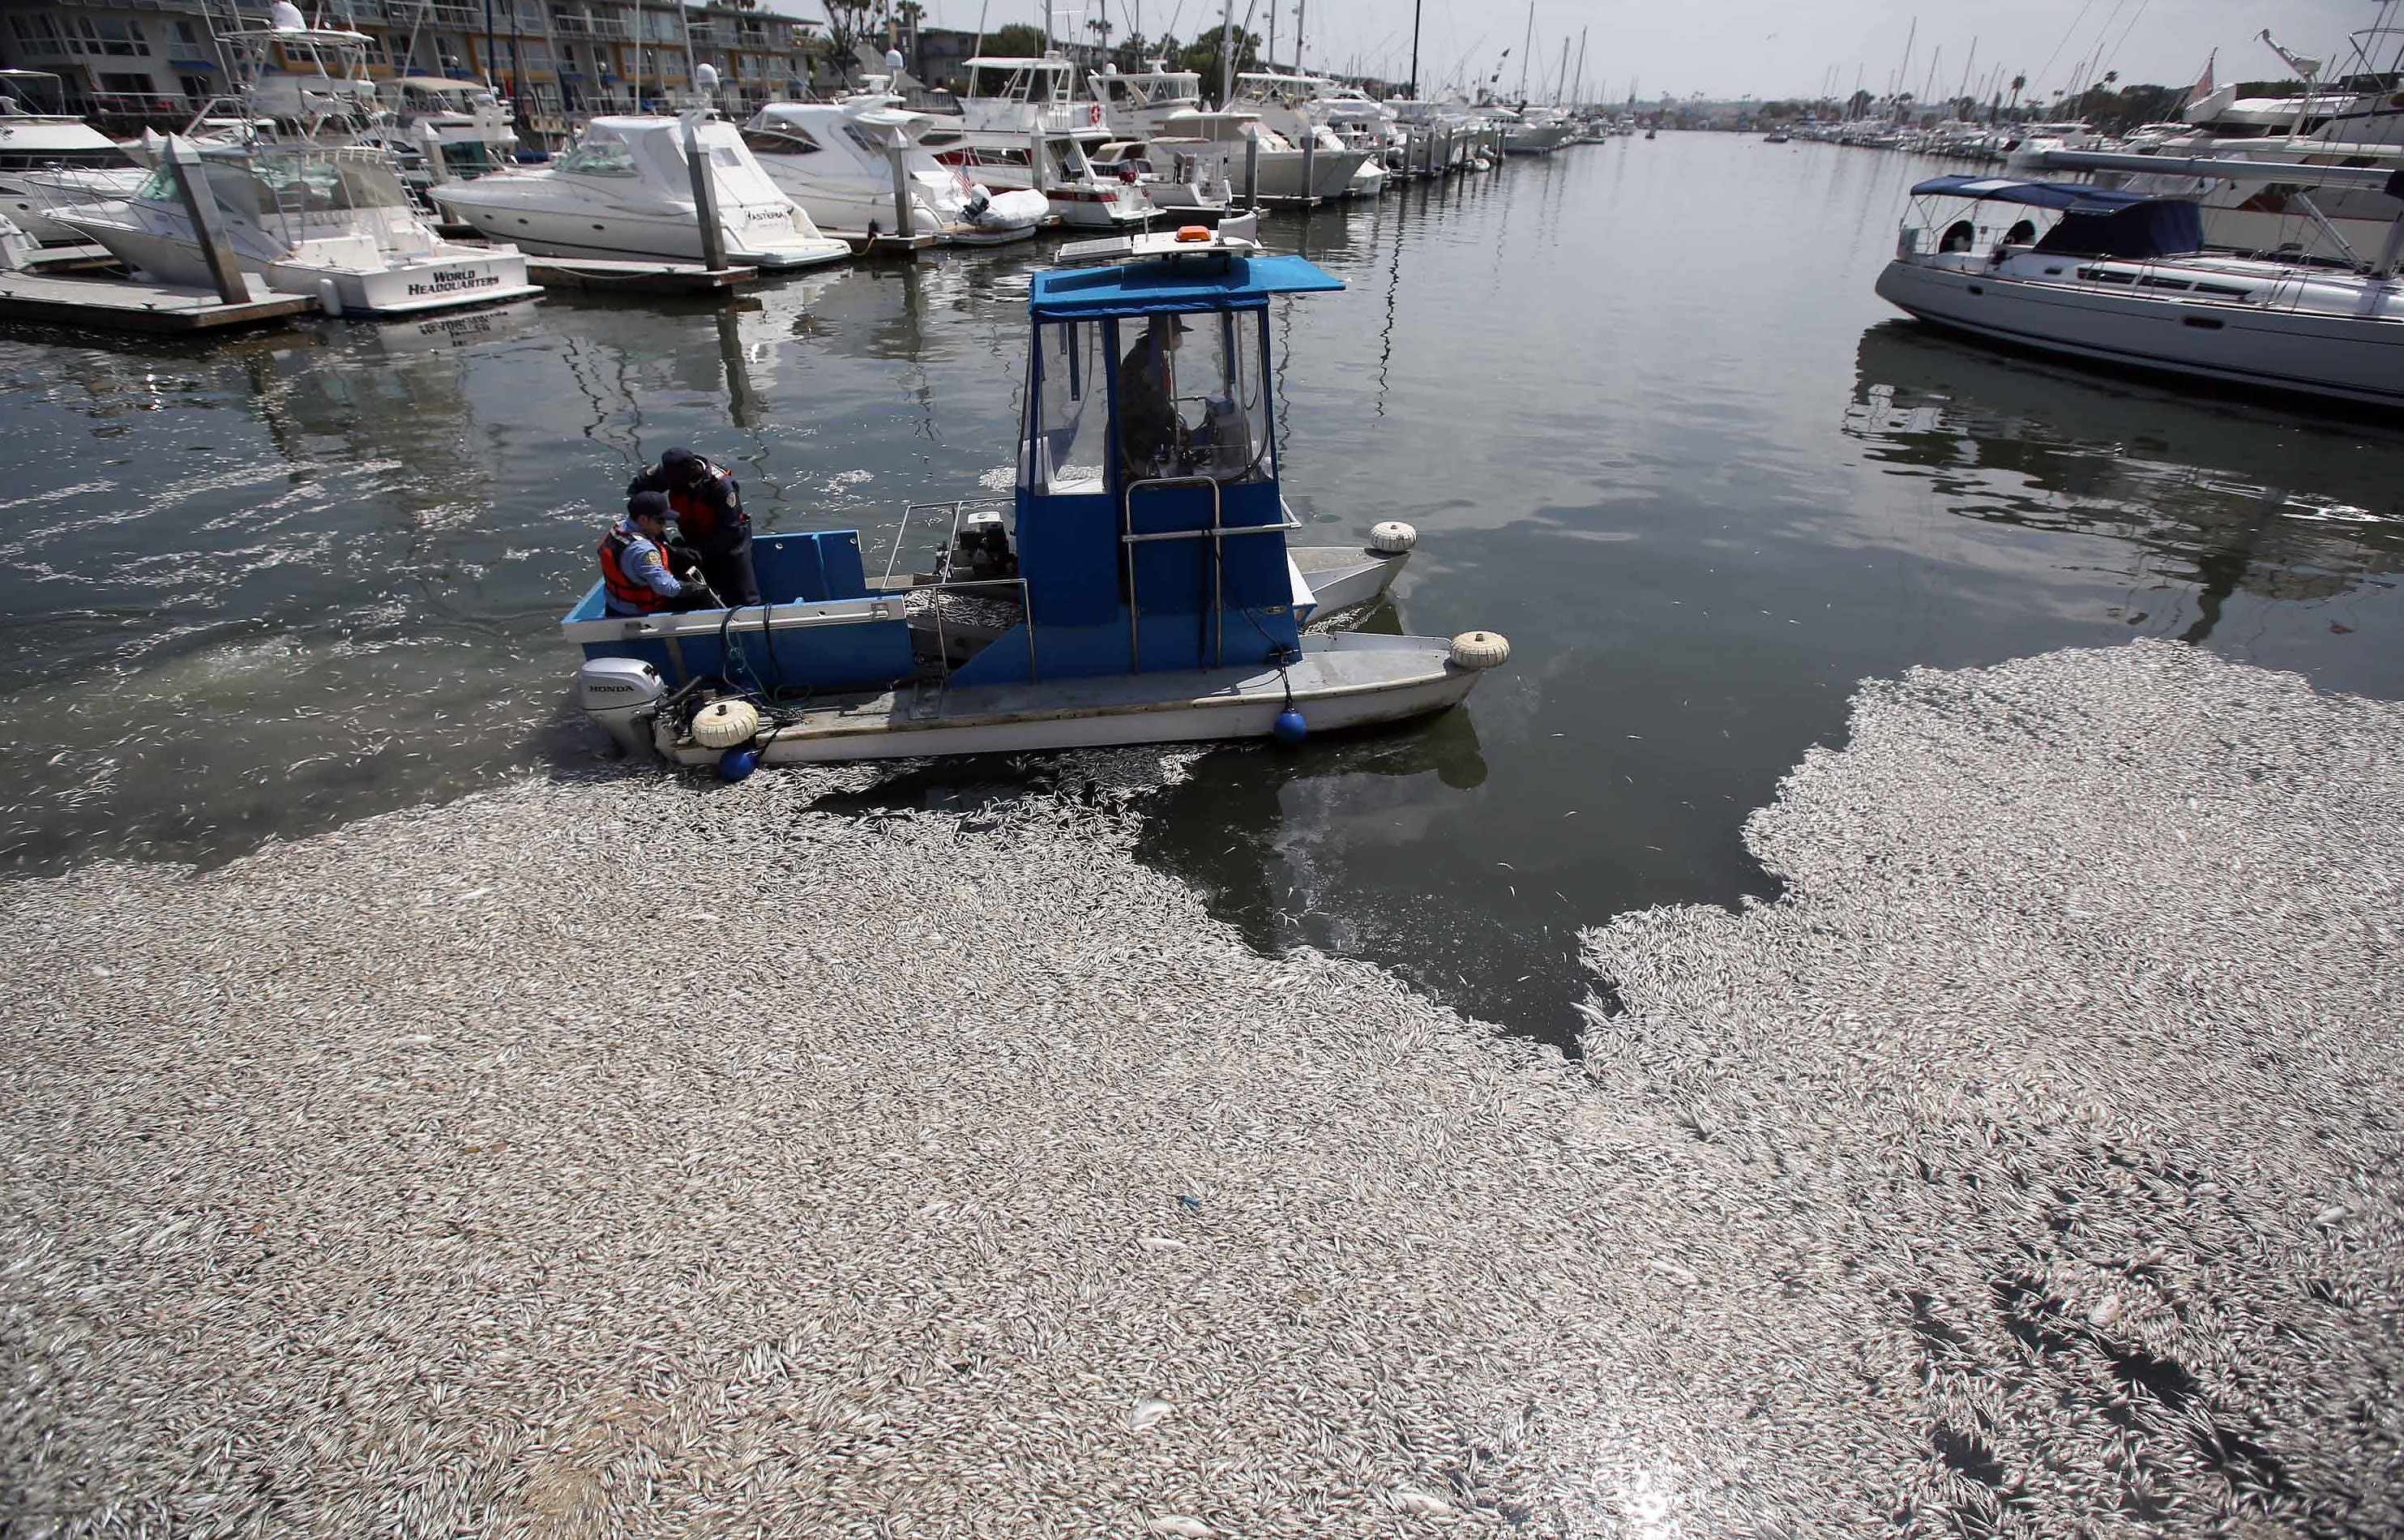 Environmental investigator assists cleanup crews and scientists determine what caused the massive fish die-off in the coastal waters of Los Angeles, California